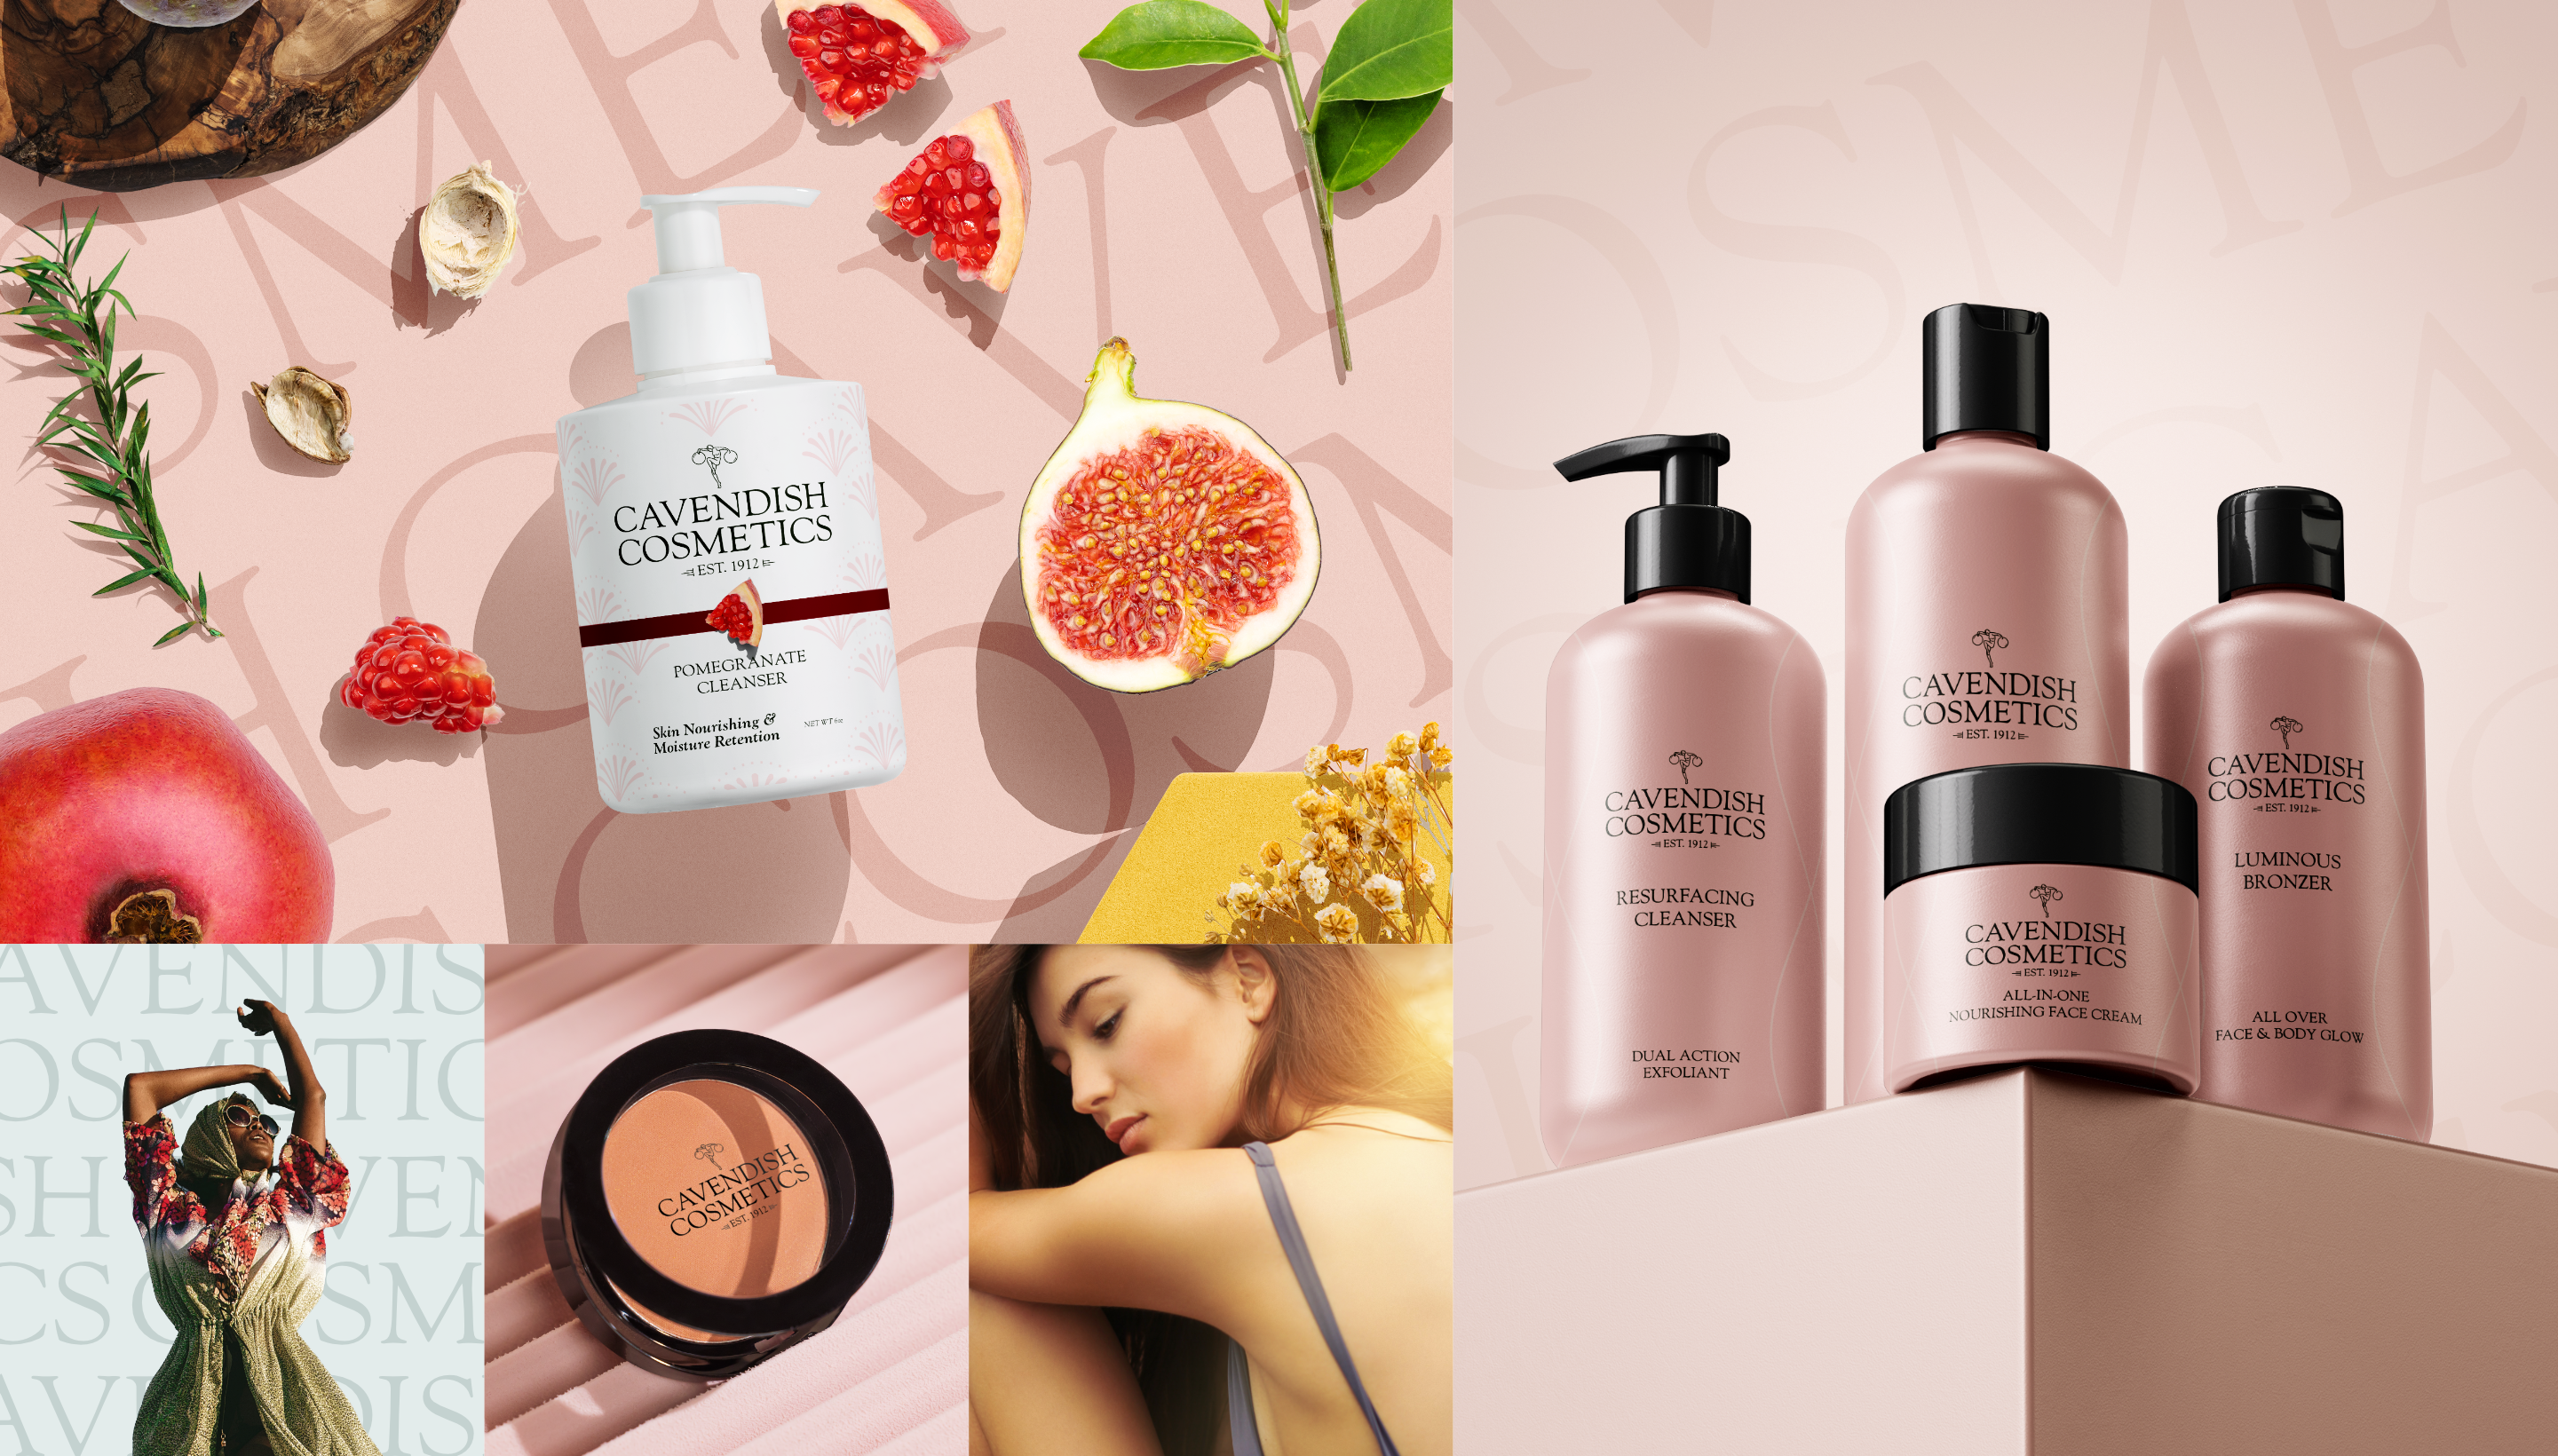 cavendish-cosmetics-product-array-collage